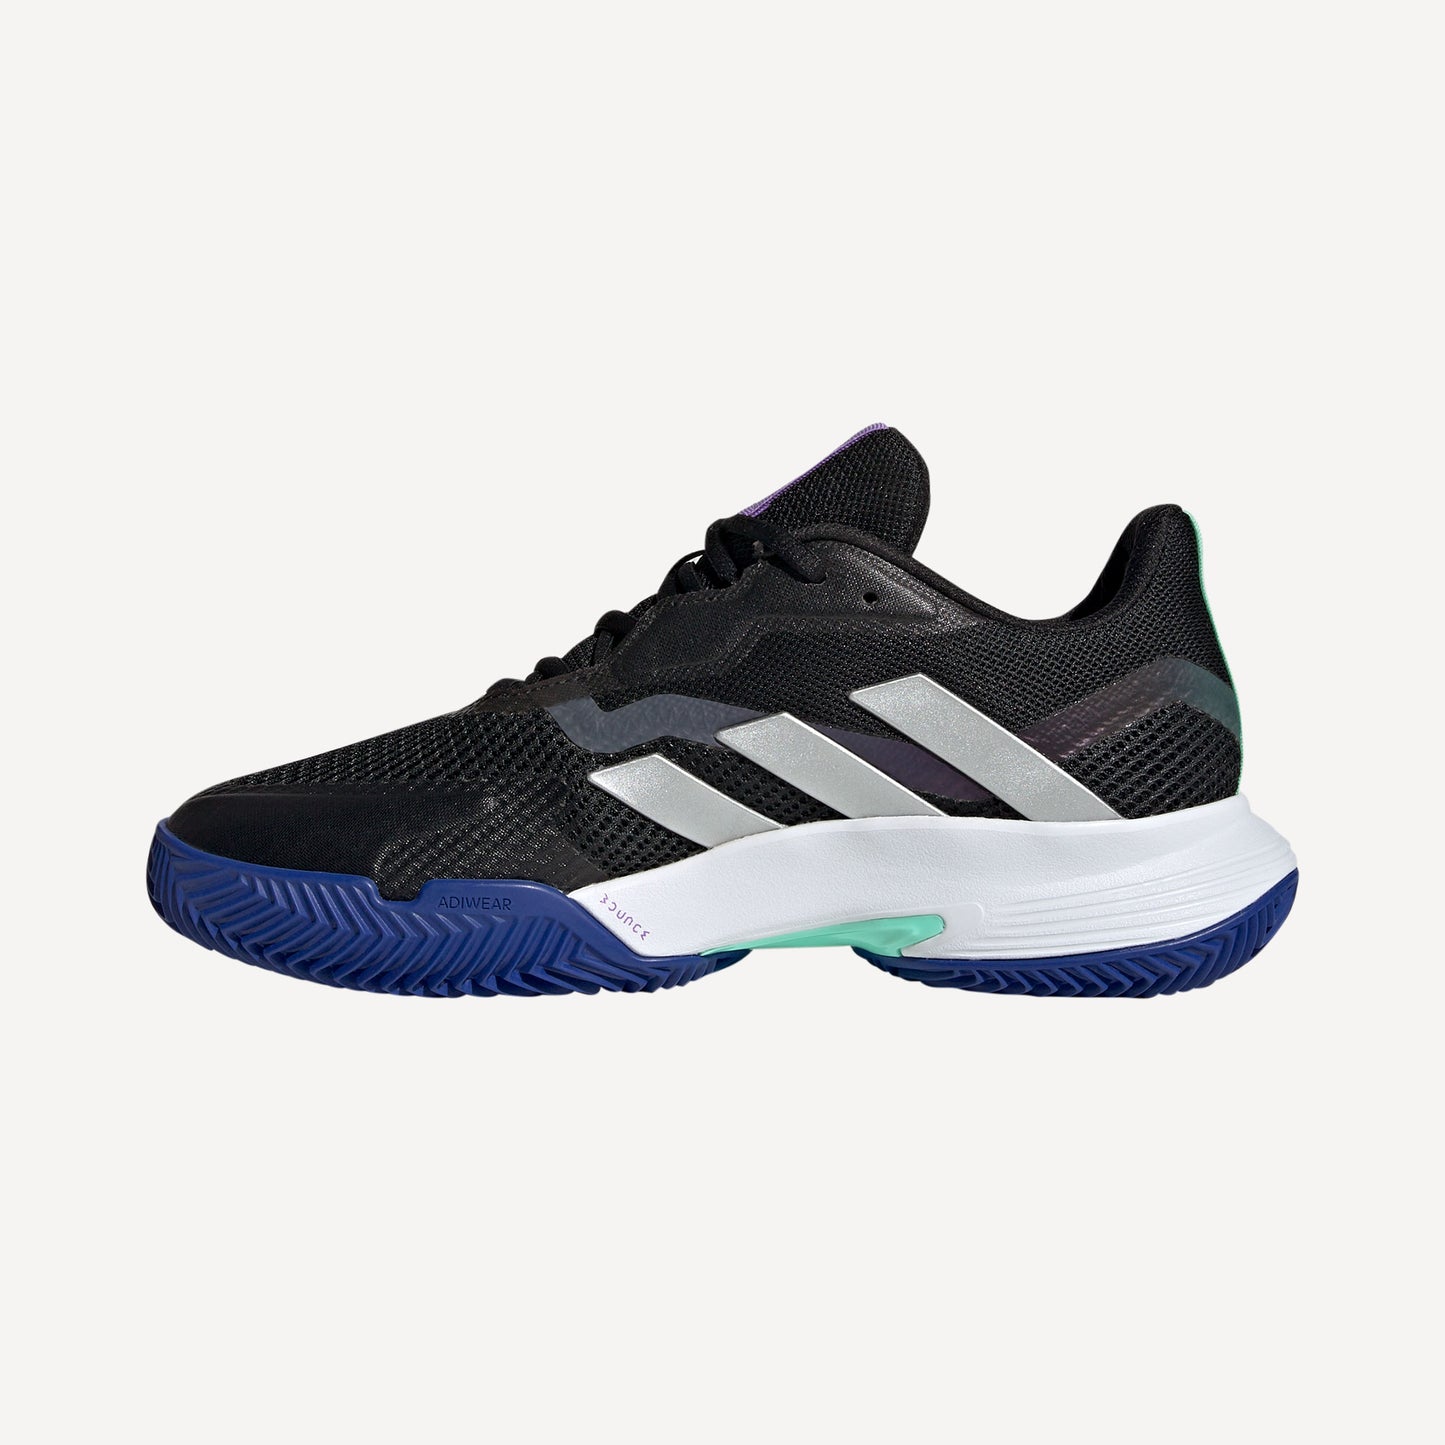 adidas CourtJam Control Women's Clay Court Tennis Shoes Black (3)